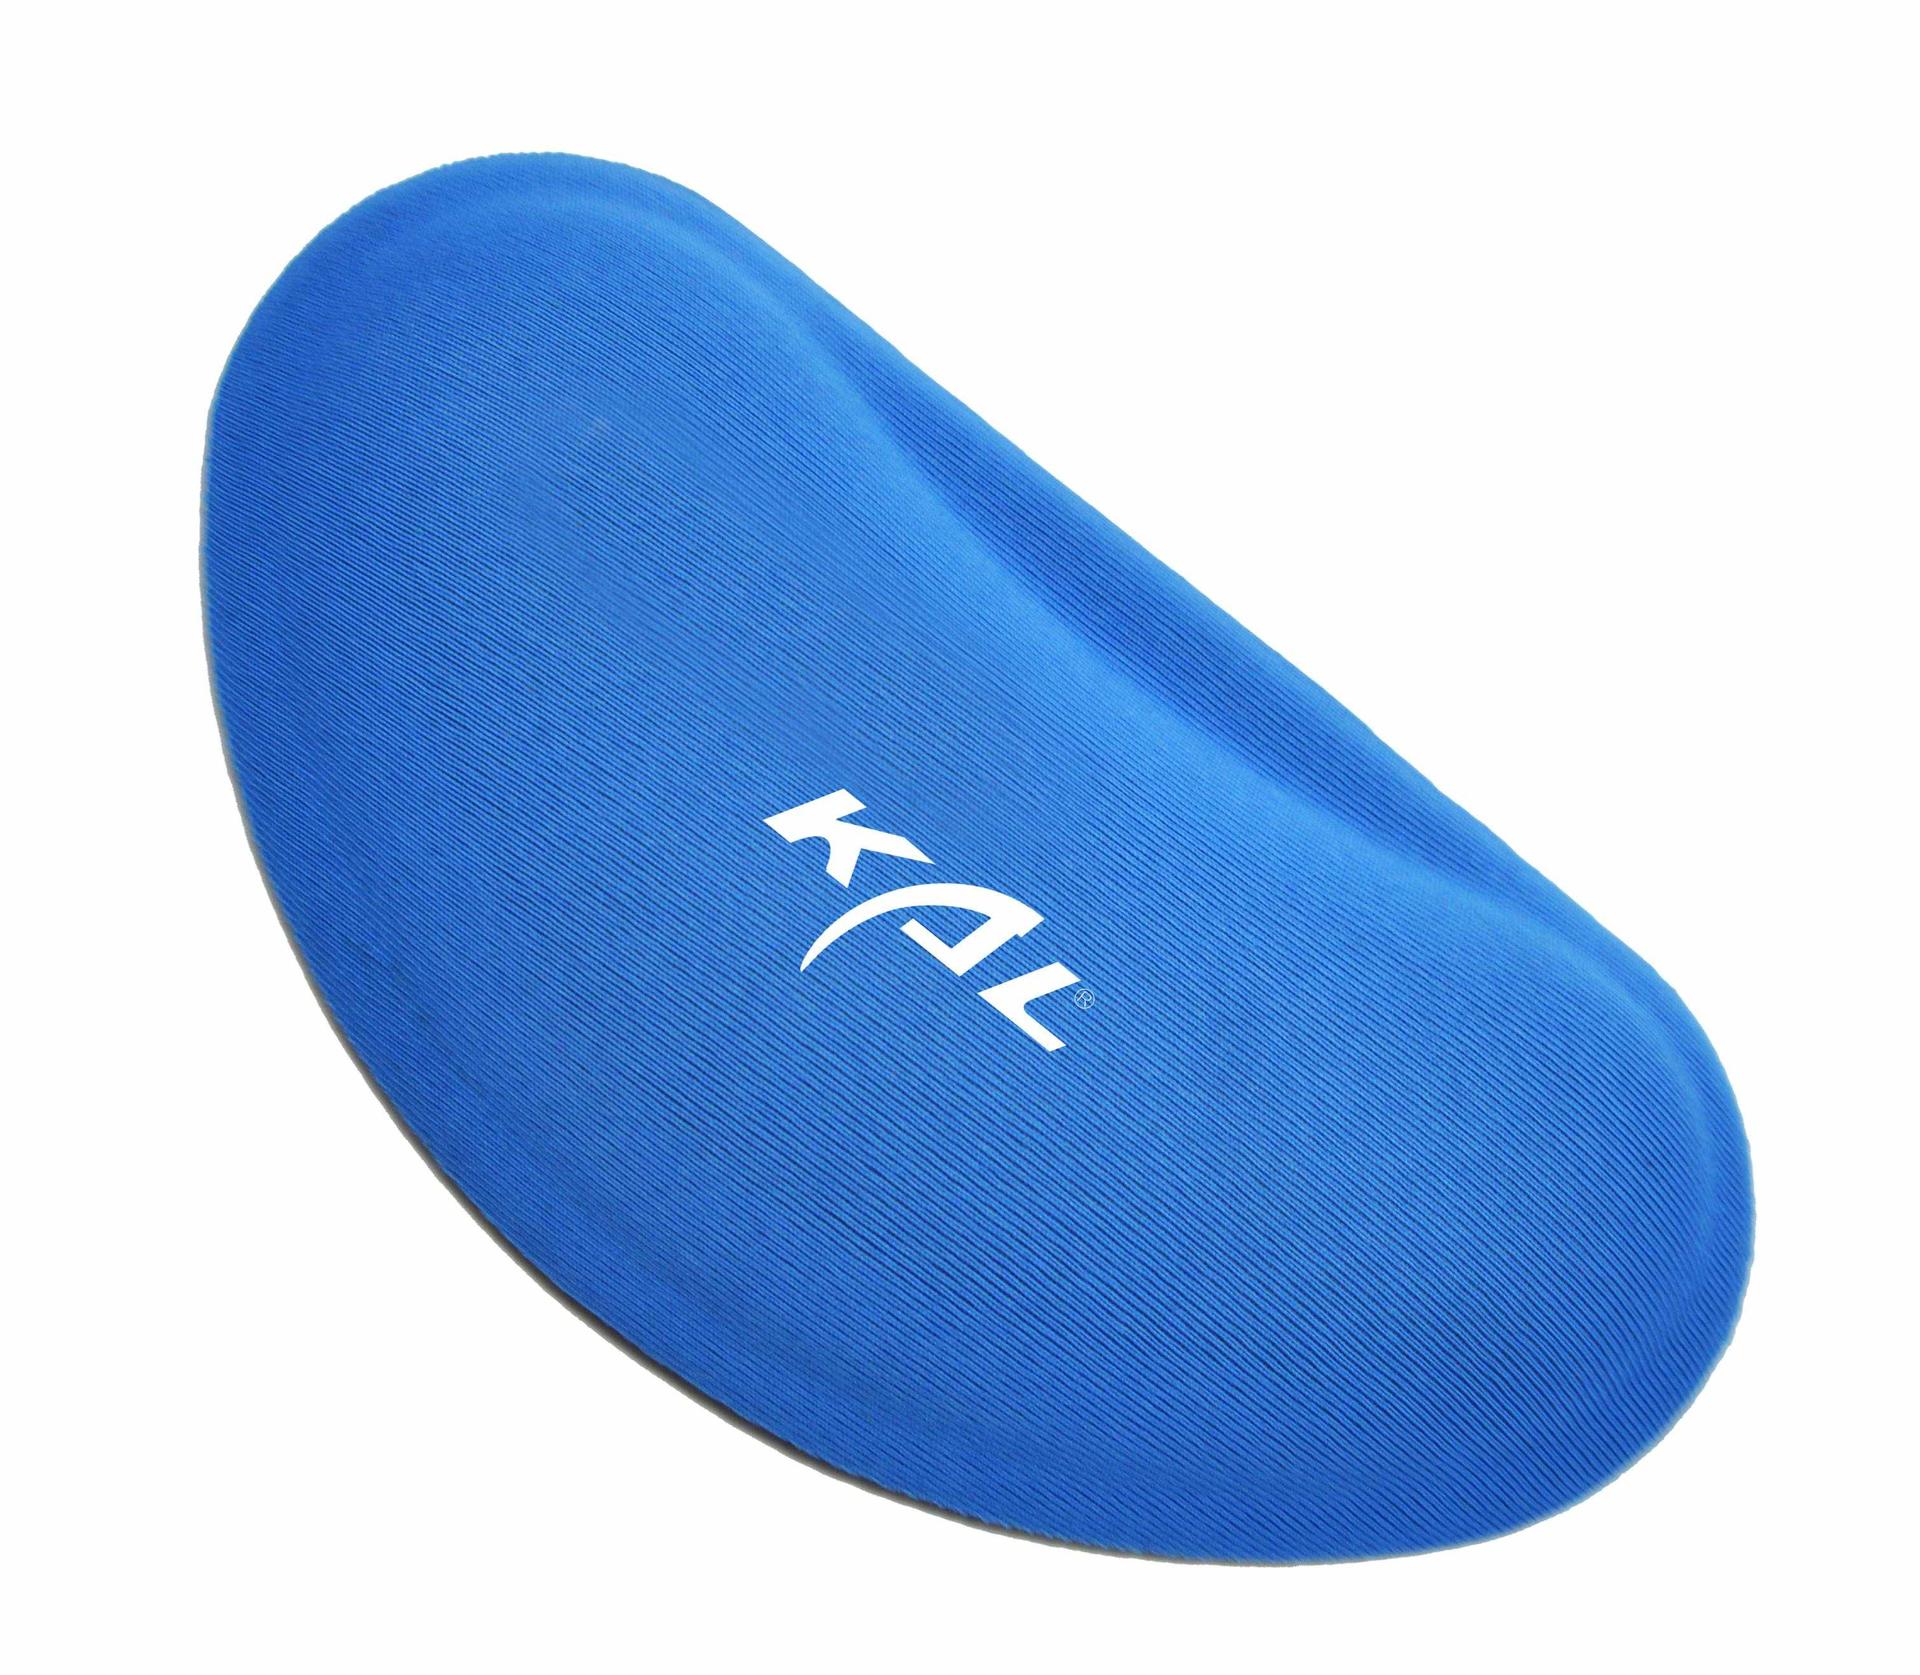 KLW-4023  Comfortable Silicone Gel Wrist Pad